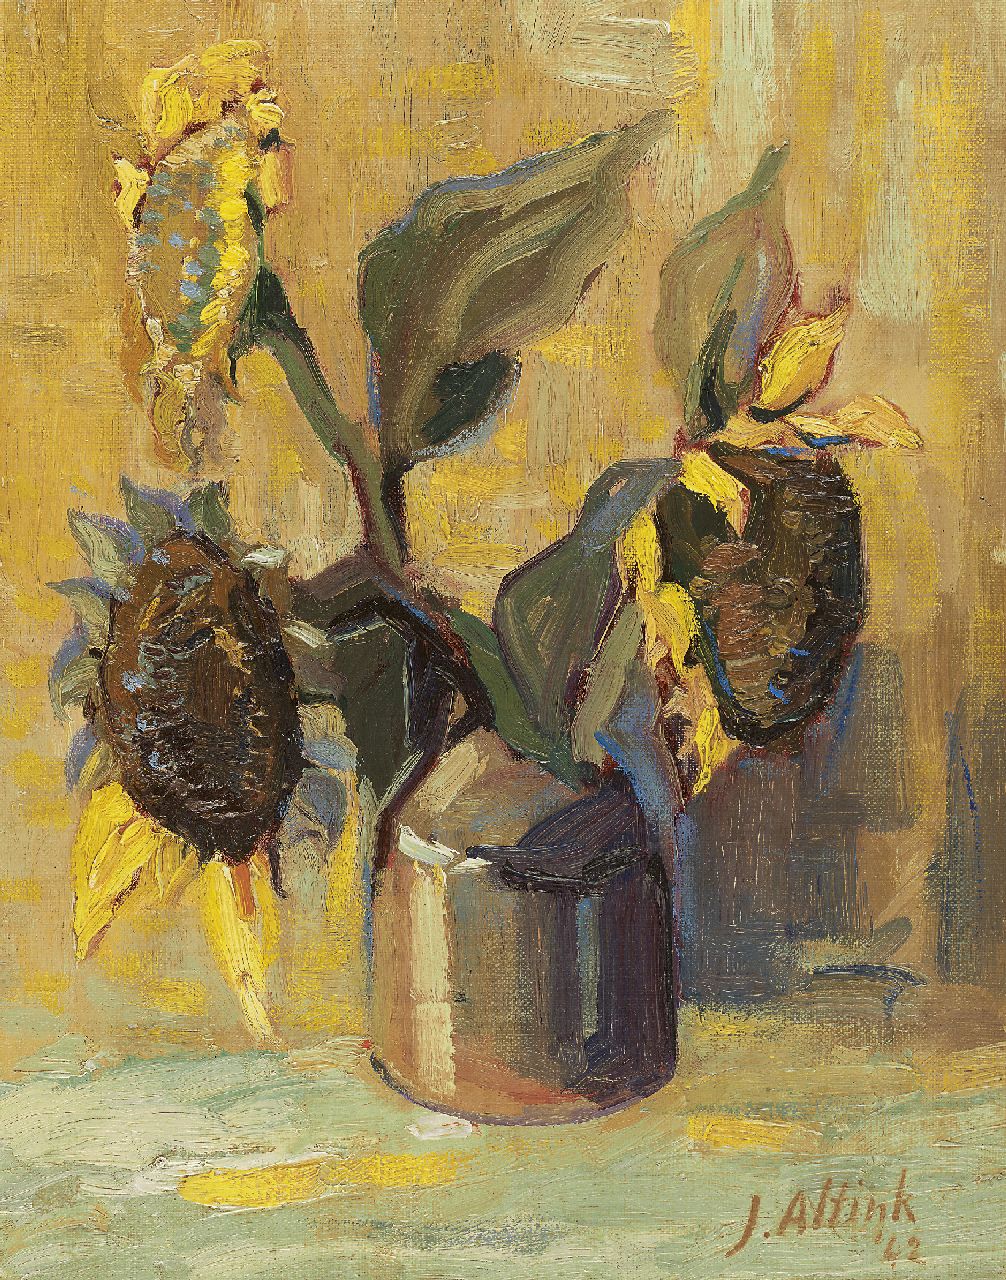 Altink J.  | Jan Altink, Sunflowers, oil on canvas laid down on board 38.2 x 30.1 cm, signed l.r. and dated ' 42